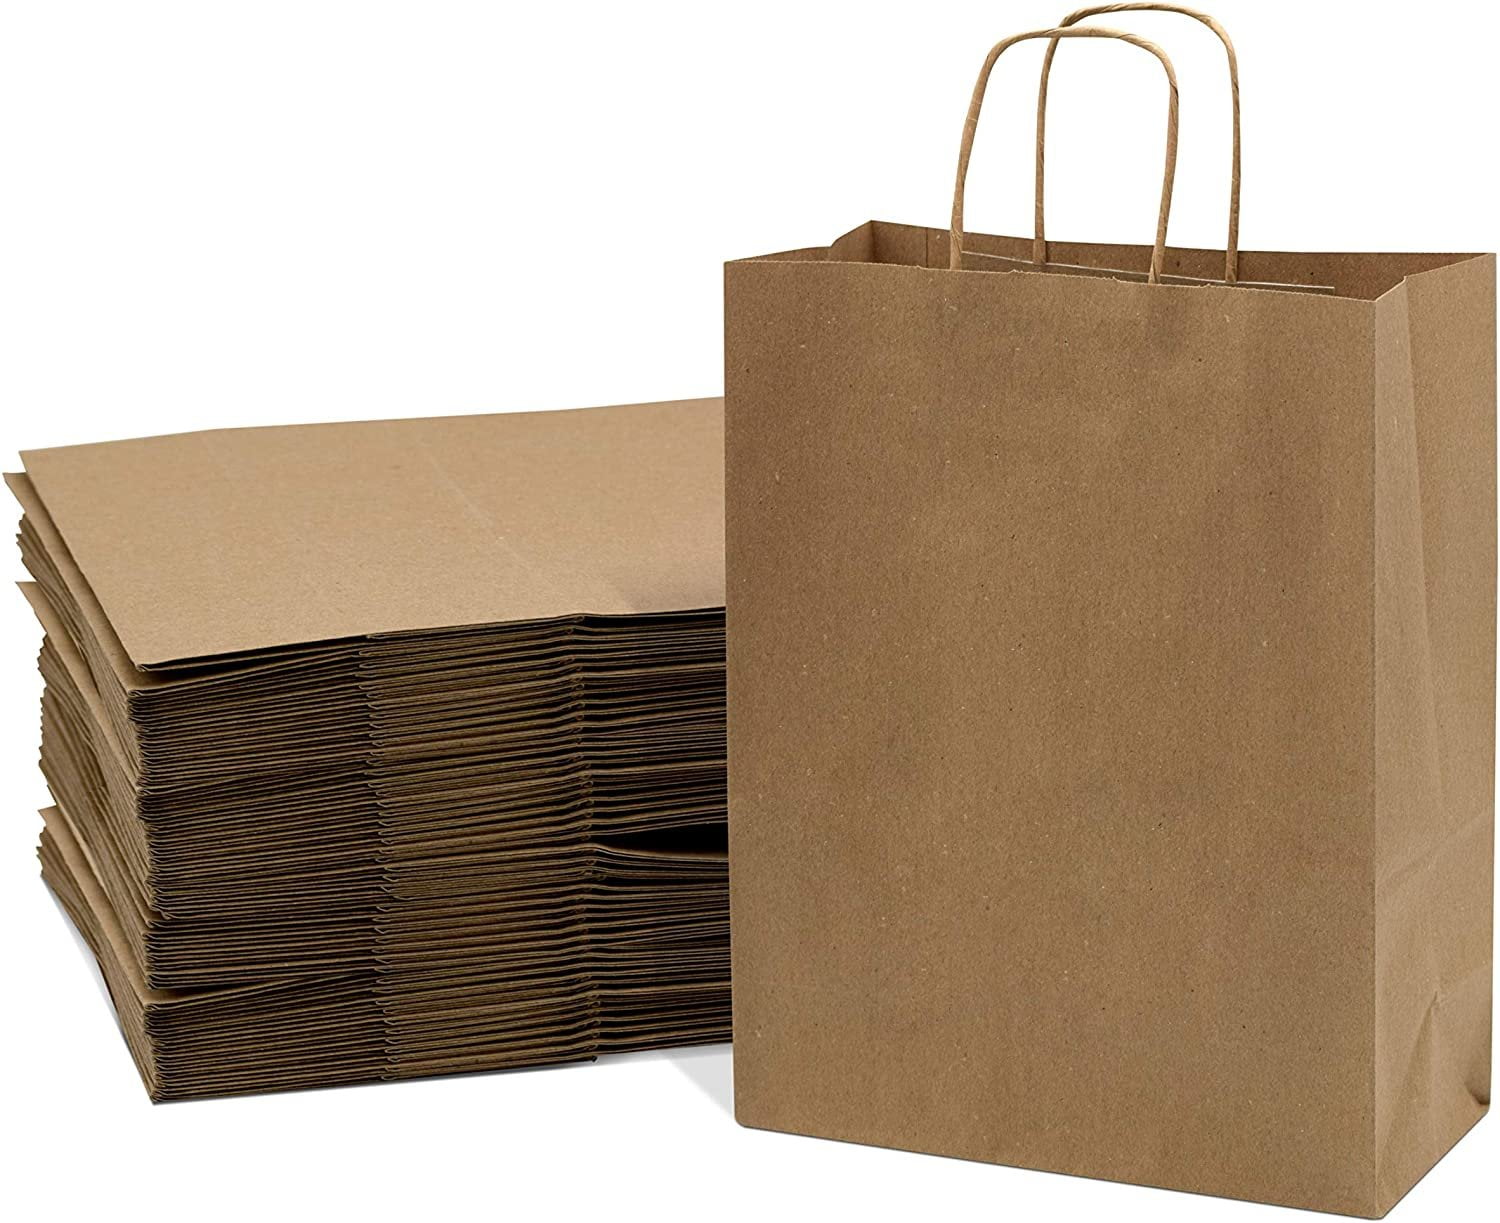 Color 100 Bags Count 16 Inch X 6 Inch x 12 Inch Brown Flexicore Packaging Brown Kraft Paper Bags Size